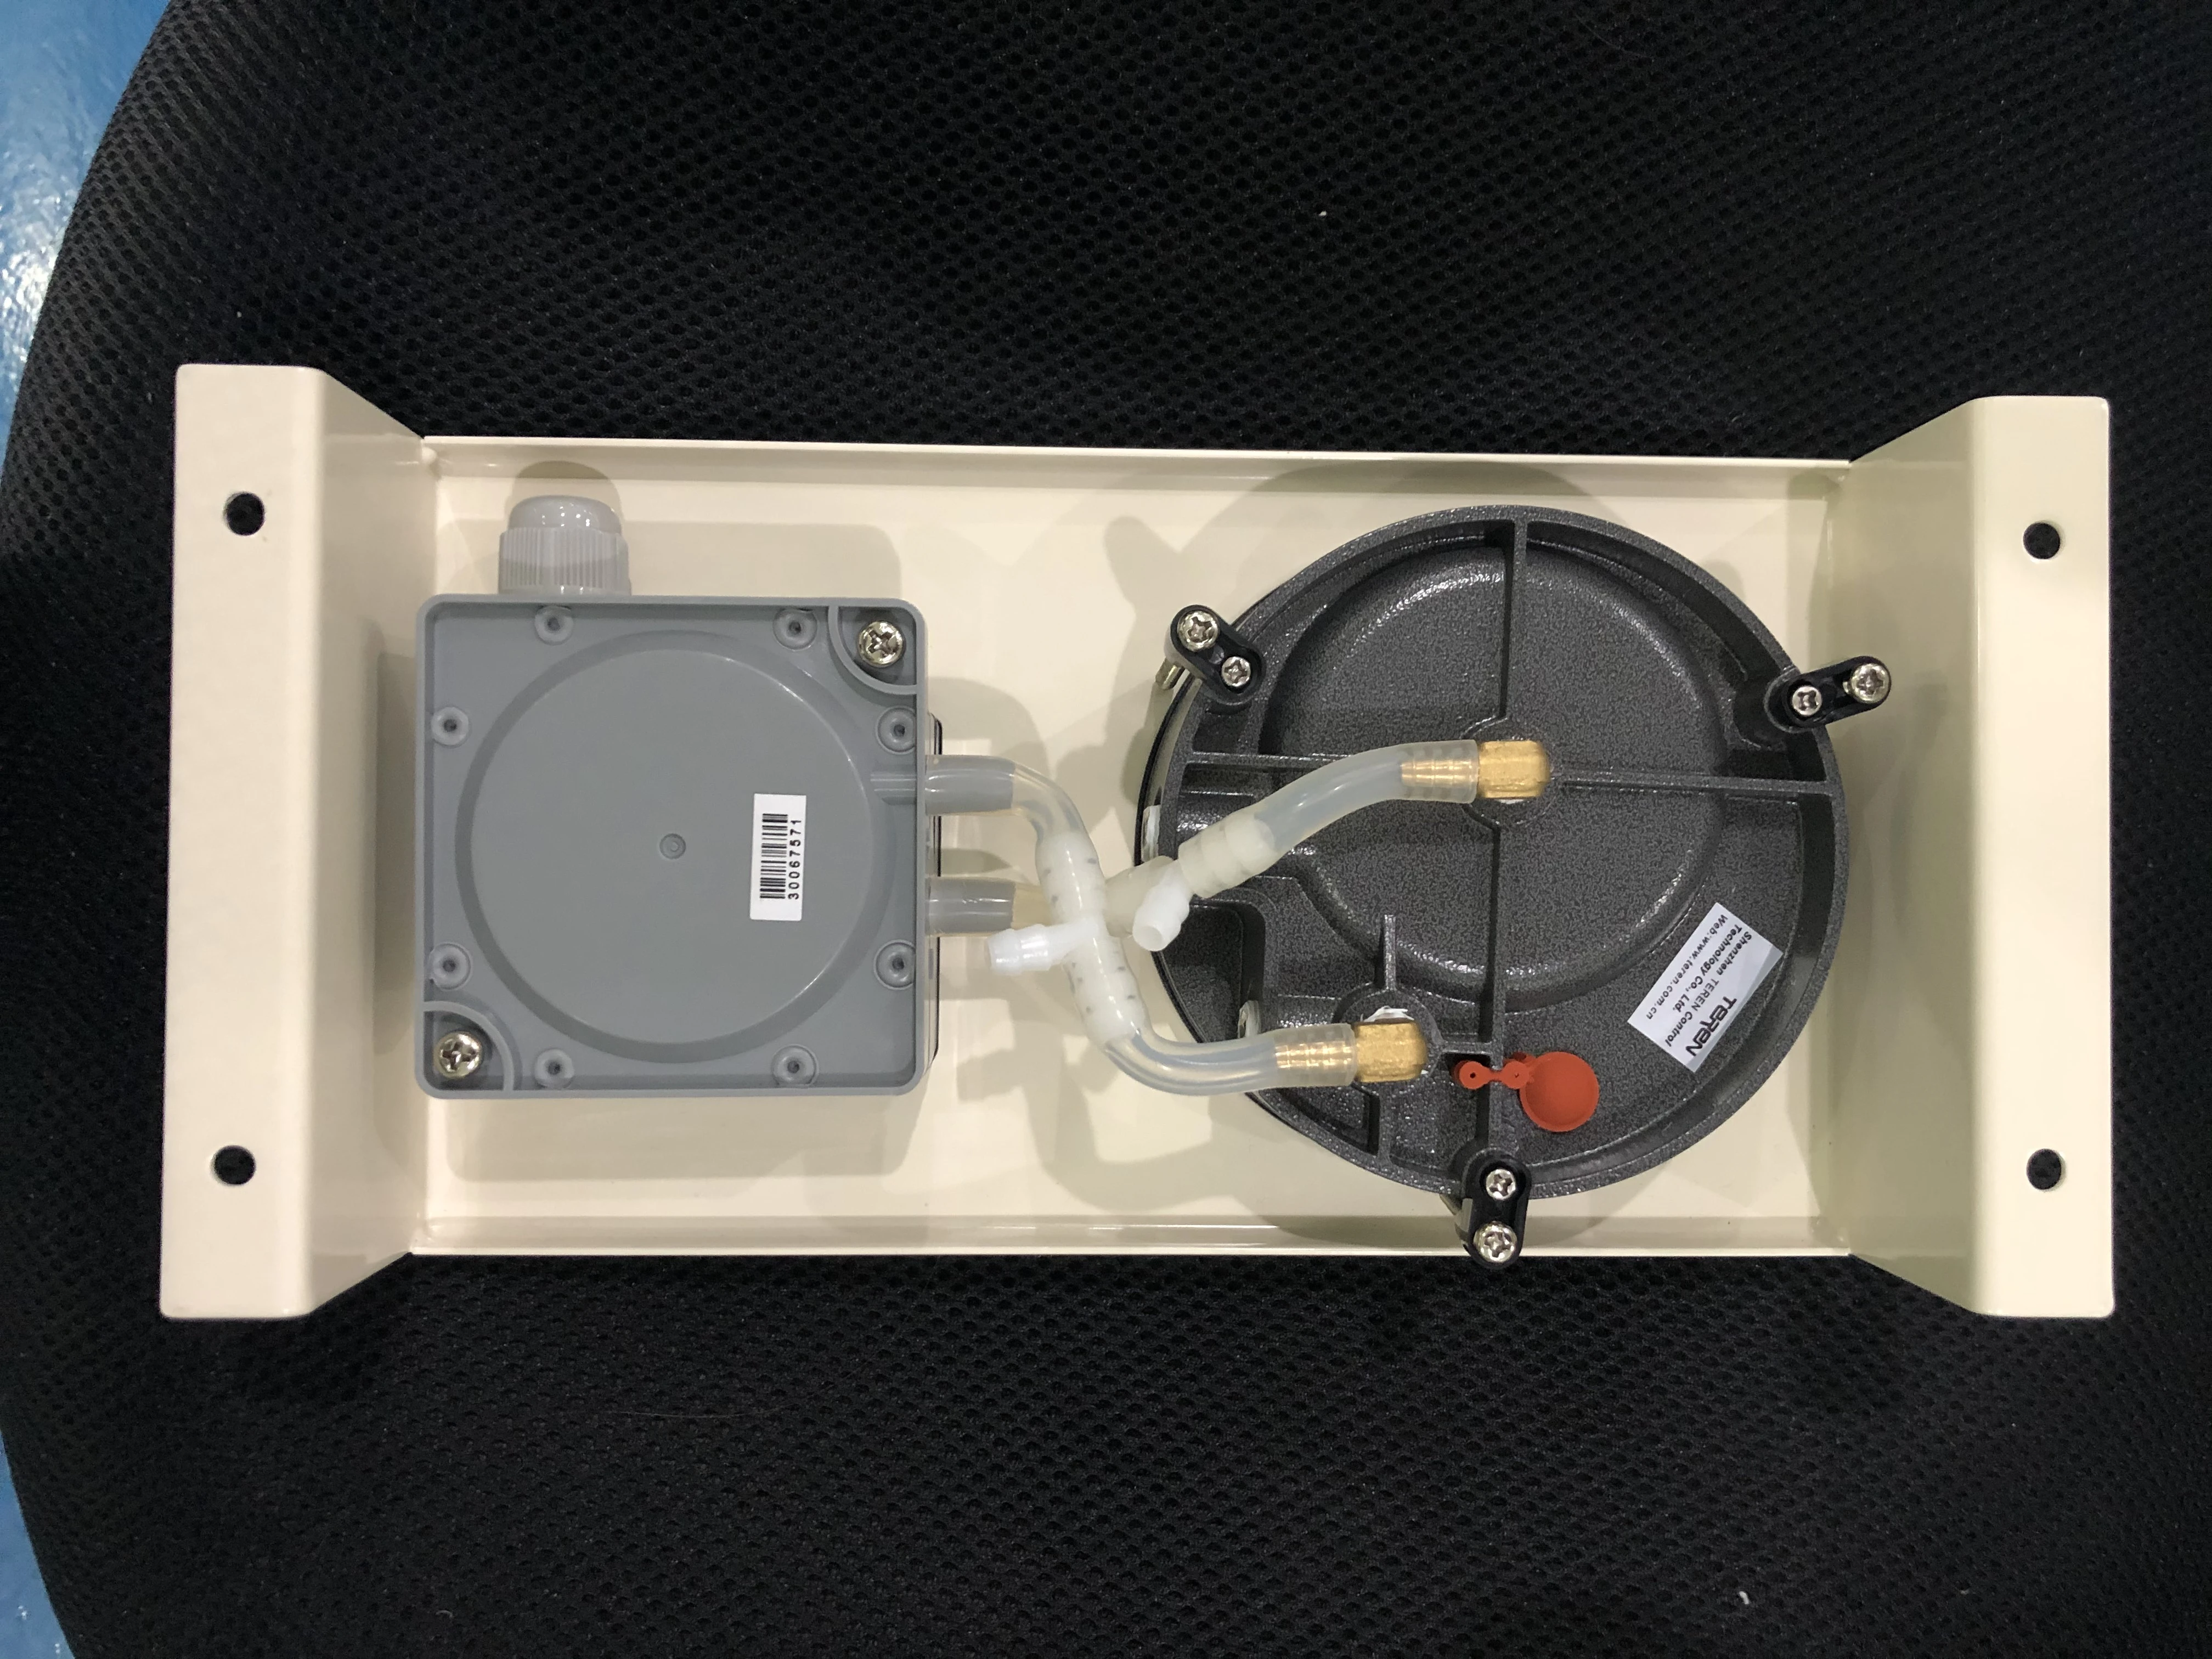 Filter Alarm differential pressure gauge with air pressure switch two in one